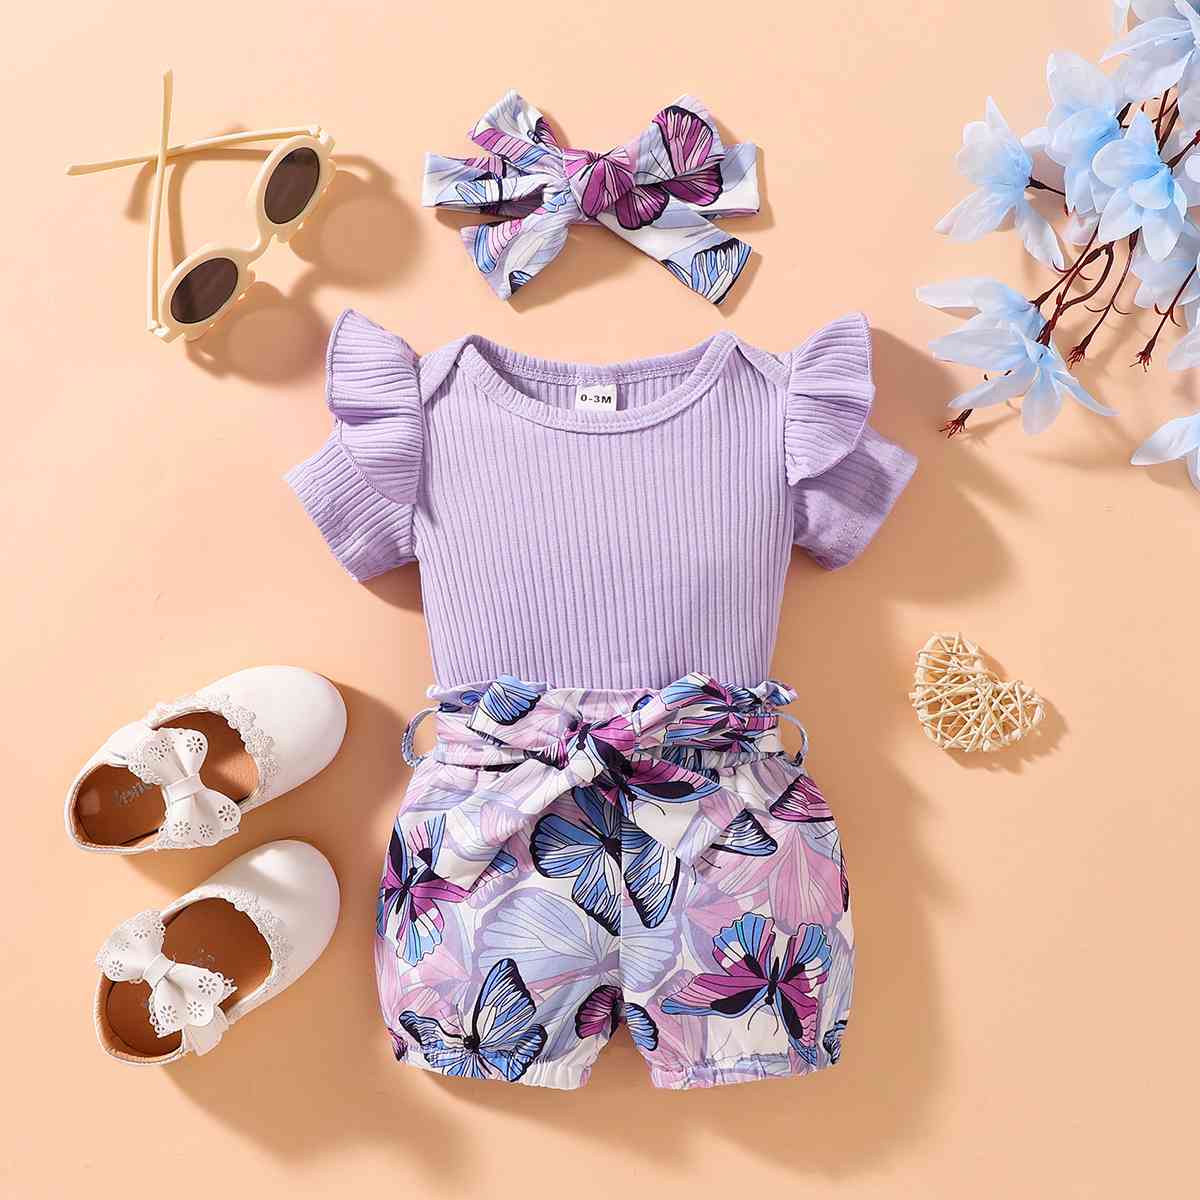 Ribbed Ruffle Shoulder Bodysuit and Butterfly Print Shorts Set | M.Q,Ship From Overseas